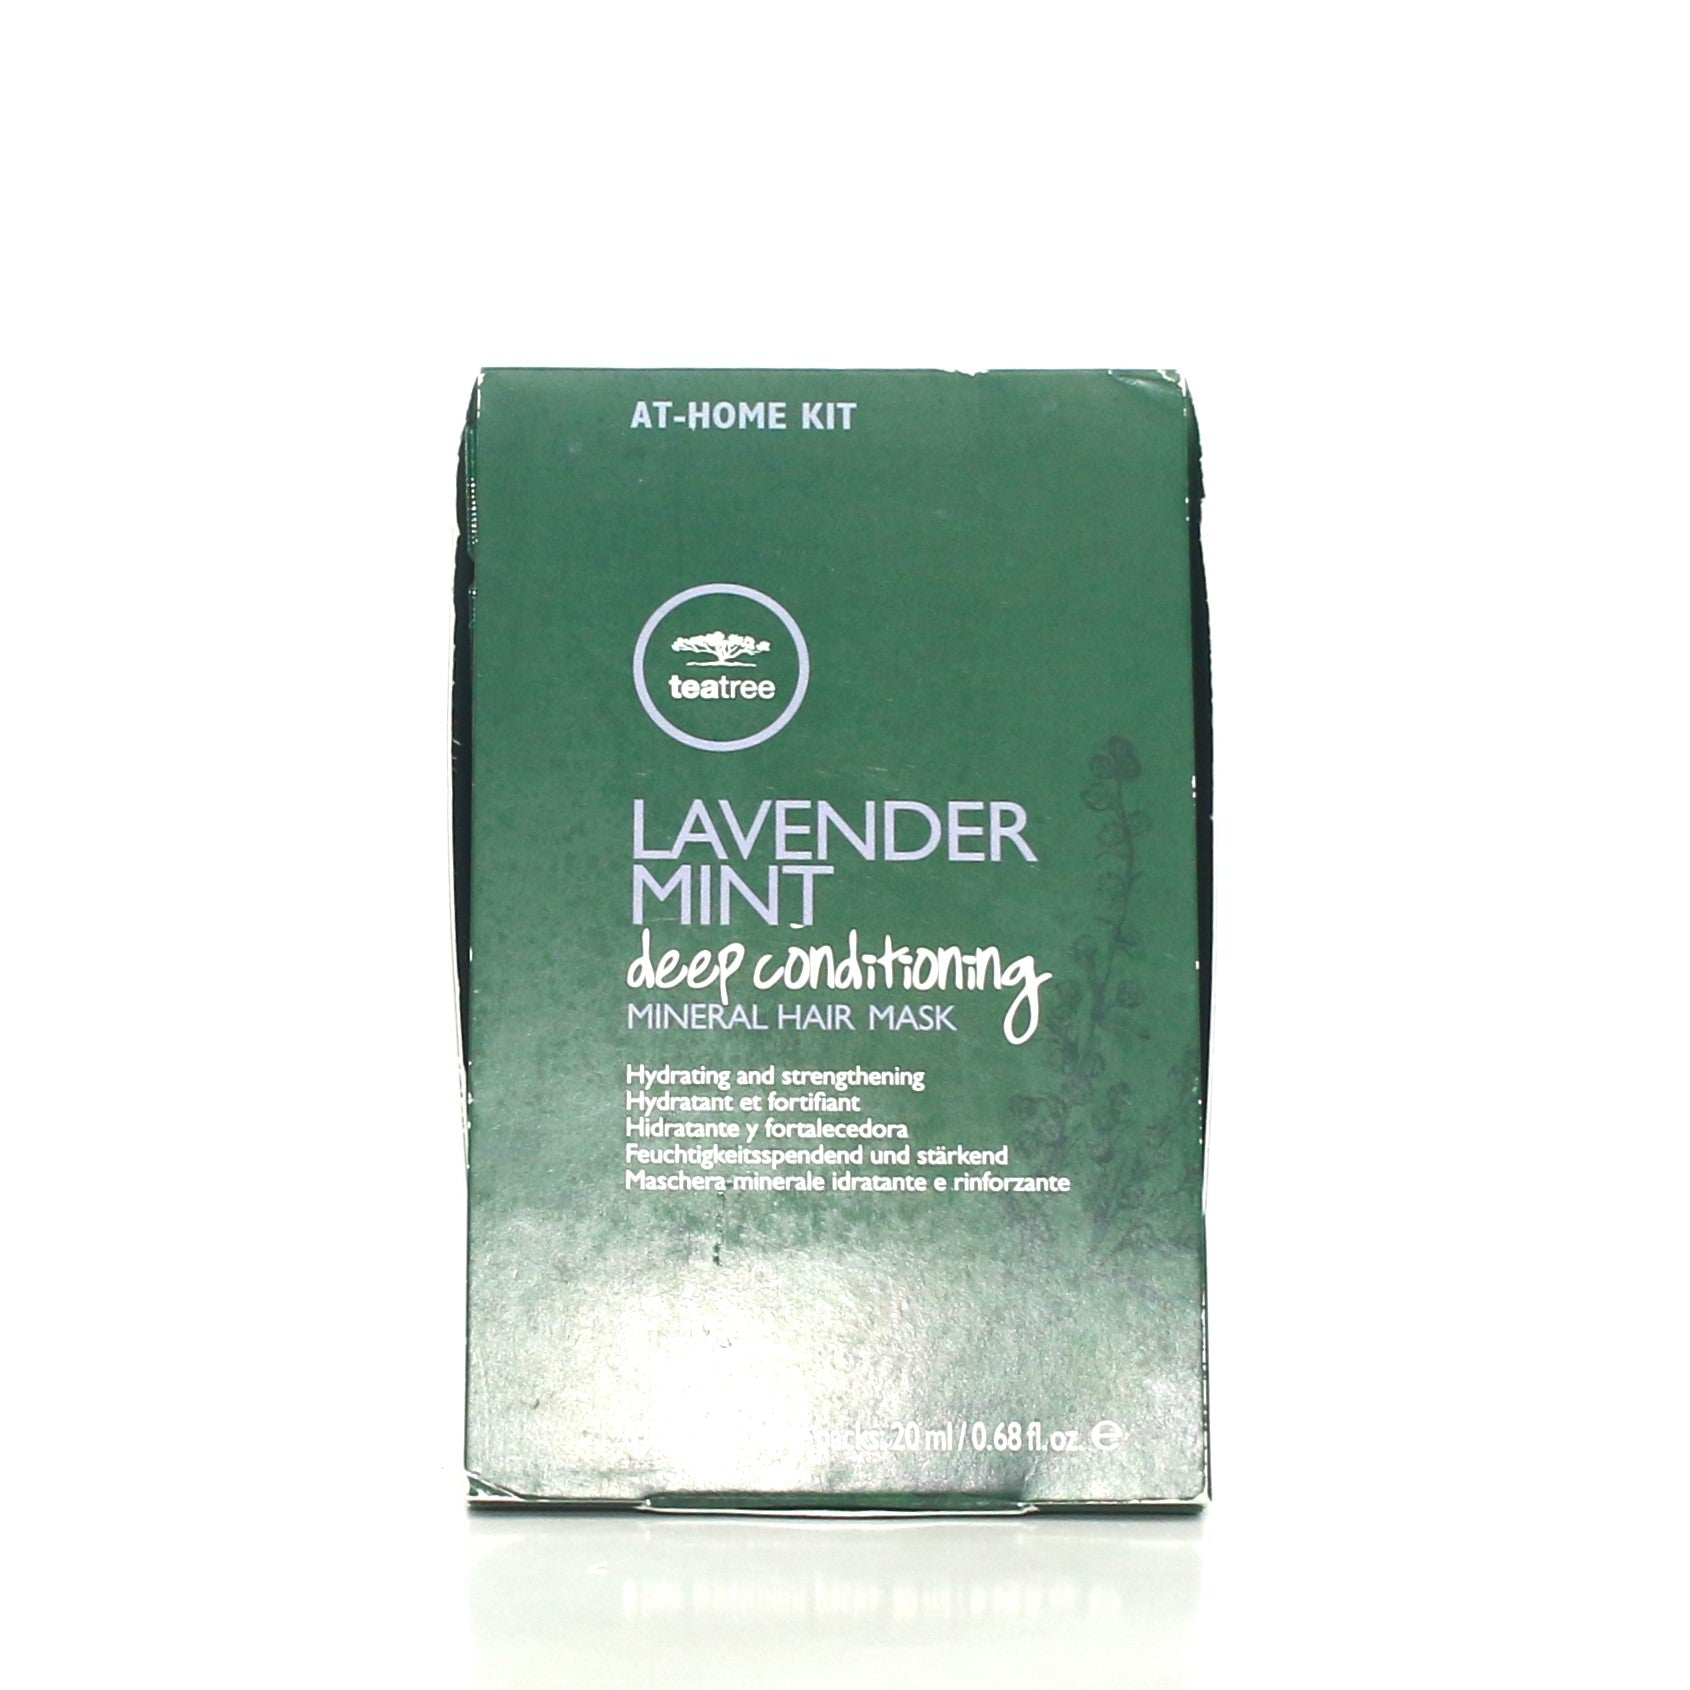 PAUL MITCHELL Tea Tree Lavender Mint Deep Conditioning Mineral Hair Mask